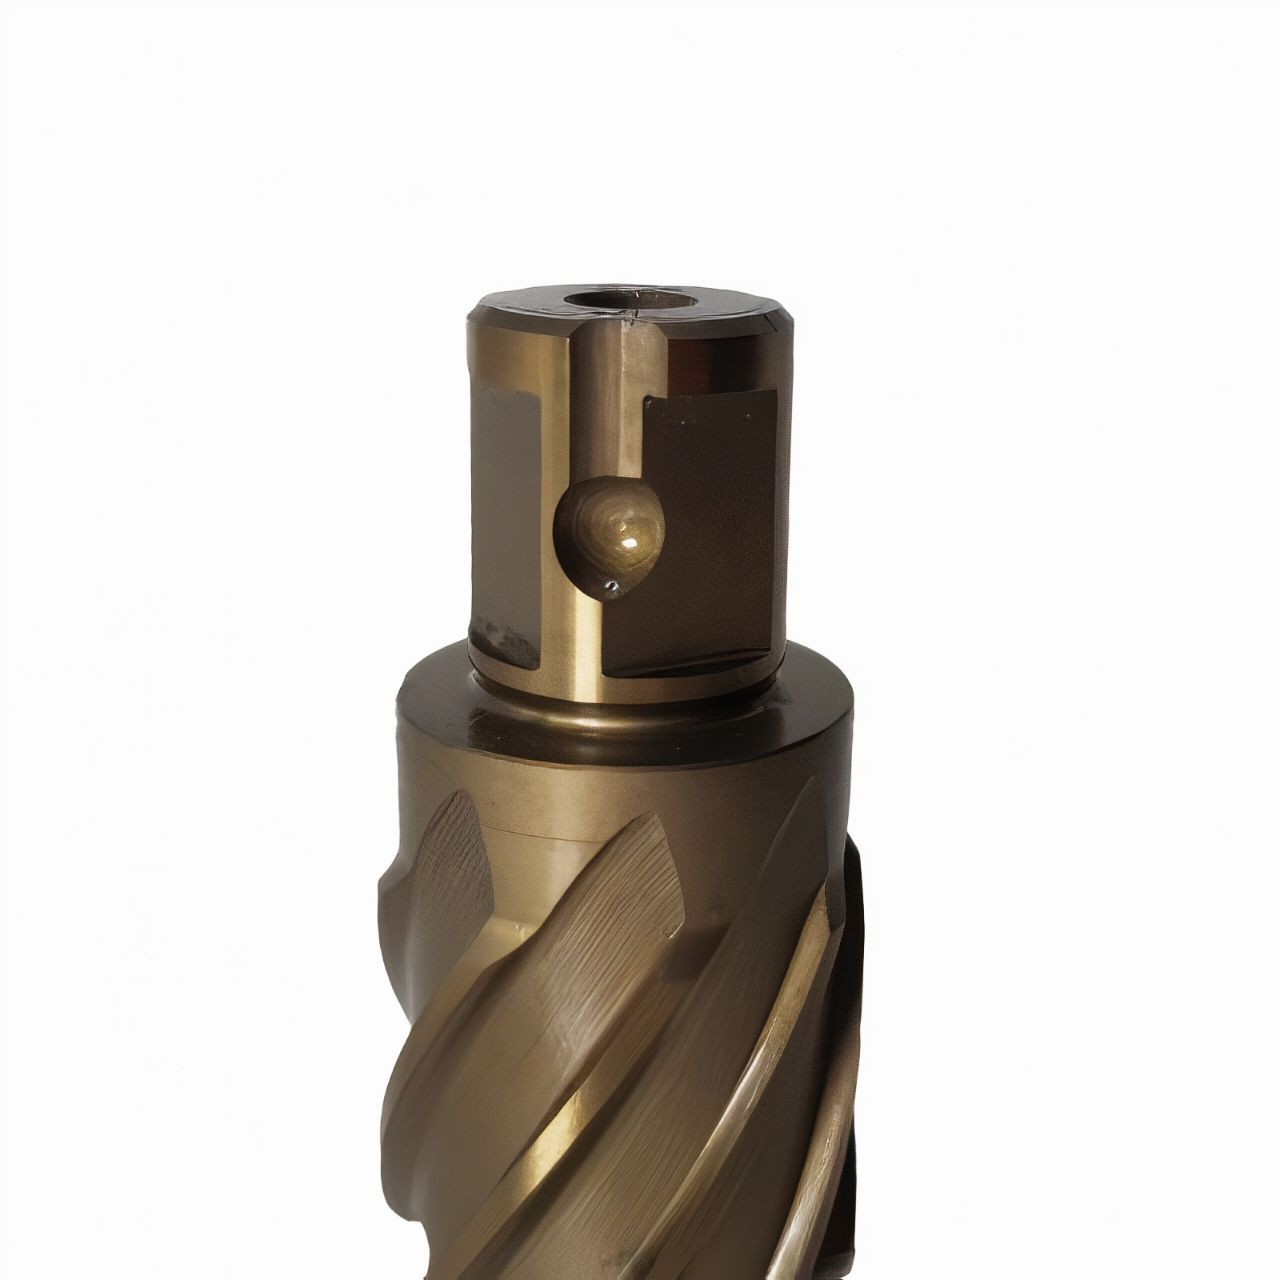 40 X 30 HSS-Co Excision Core Drill